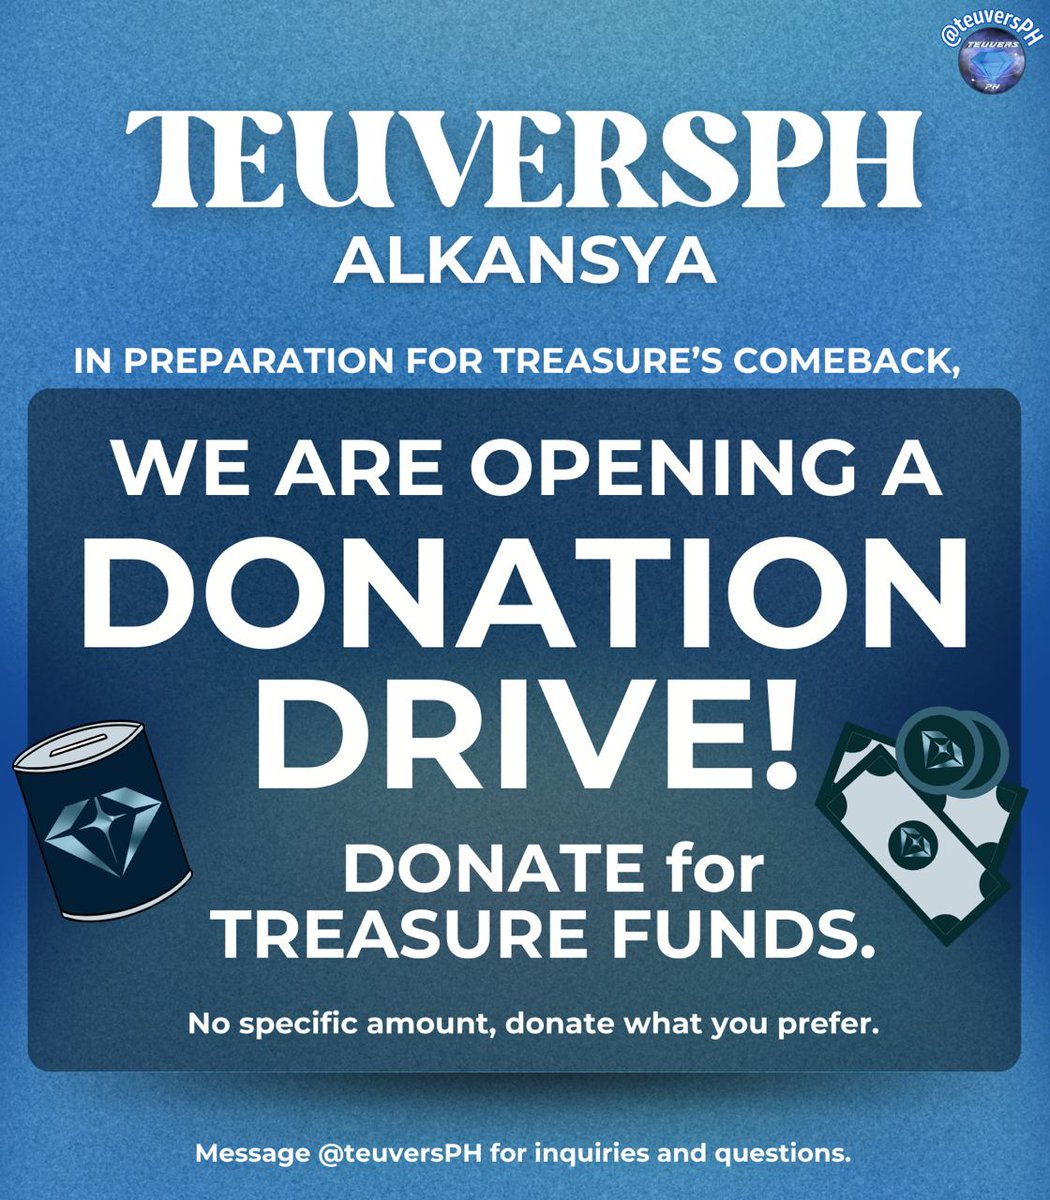 [COMEBACK DONATION DRIVE] — TEUVERSPH ALKANSYA 50% 📈 TREASURE MAKERS 📈 'Saan aabot ang bente pesos mo?' You know, Teumes are like sticks from a broomstick. When bound together, we become even stronger! That's why a 20-peso bill may seem like a small amount, but if we collect